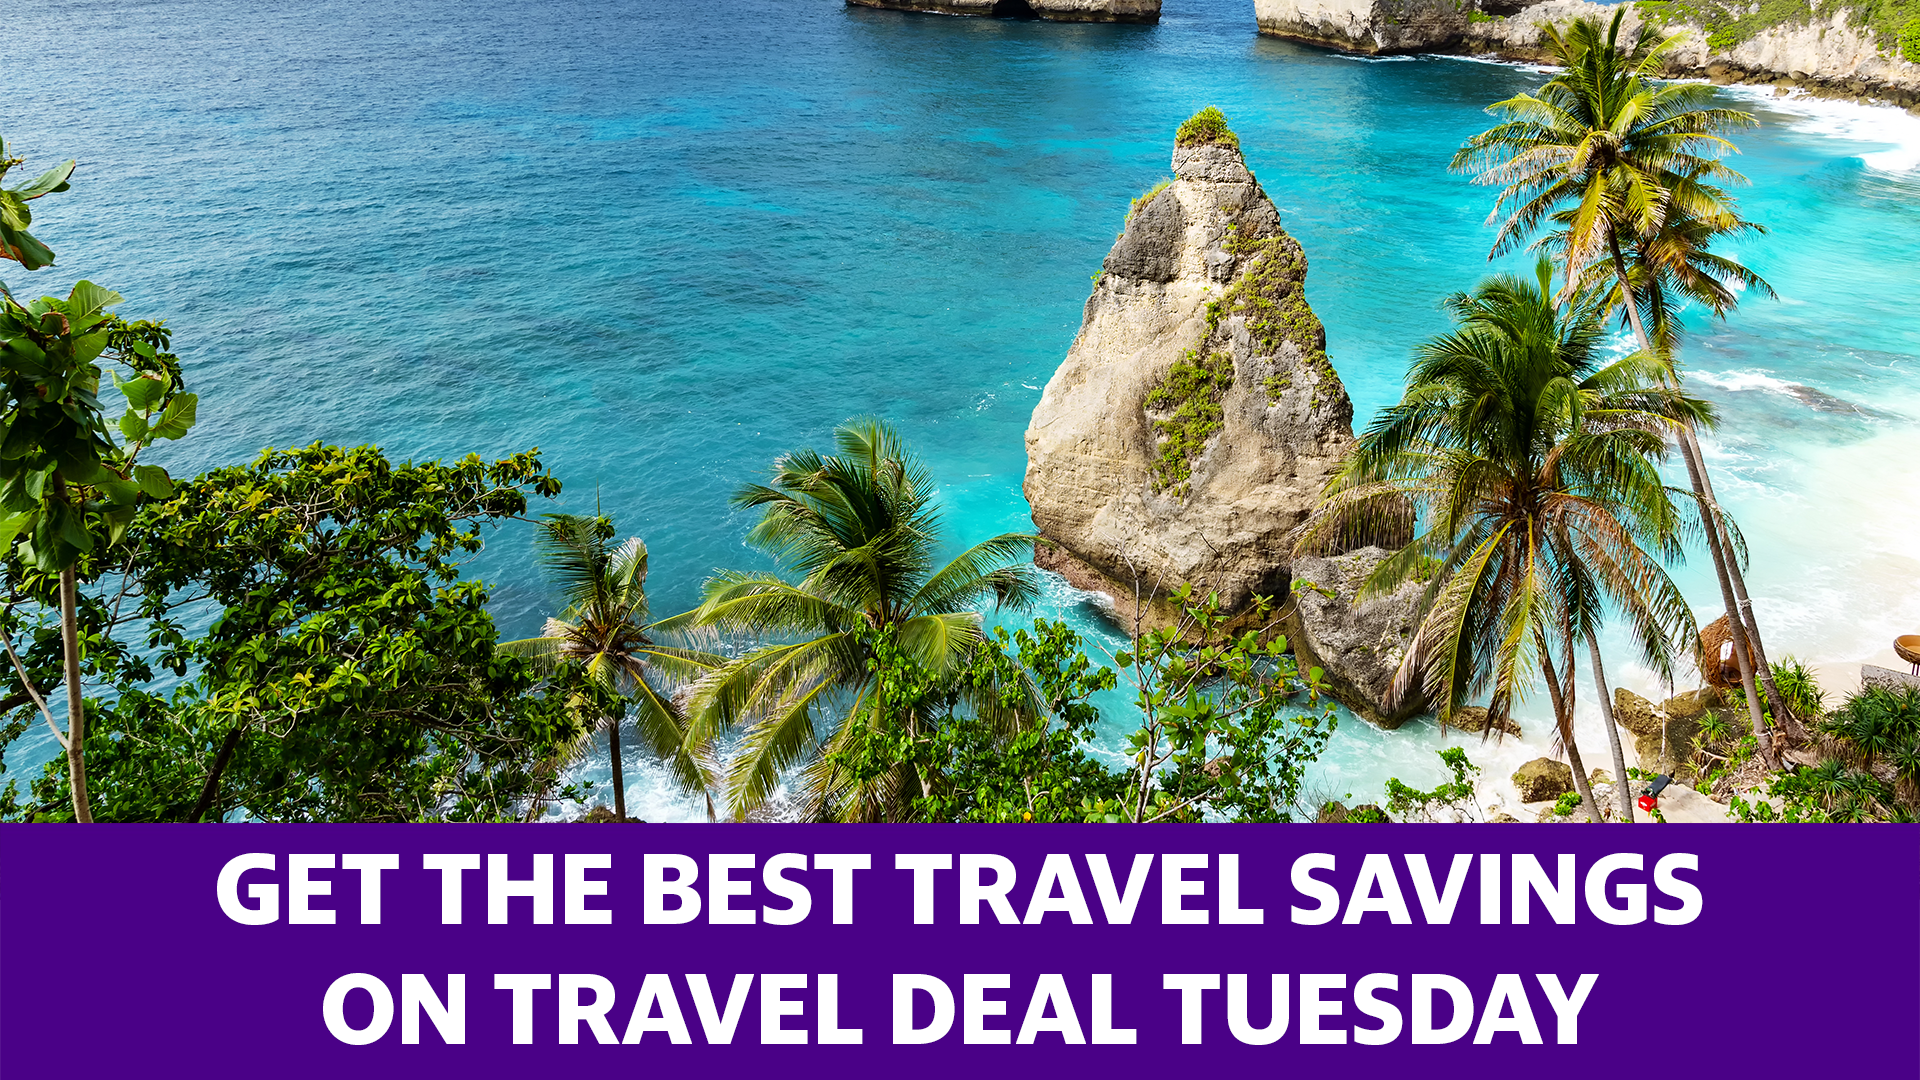 Travel Deal Tuesday is the best day for travel deals